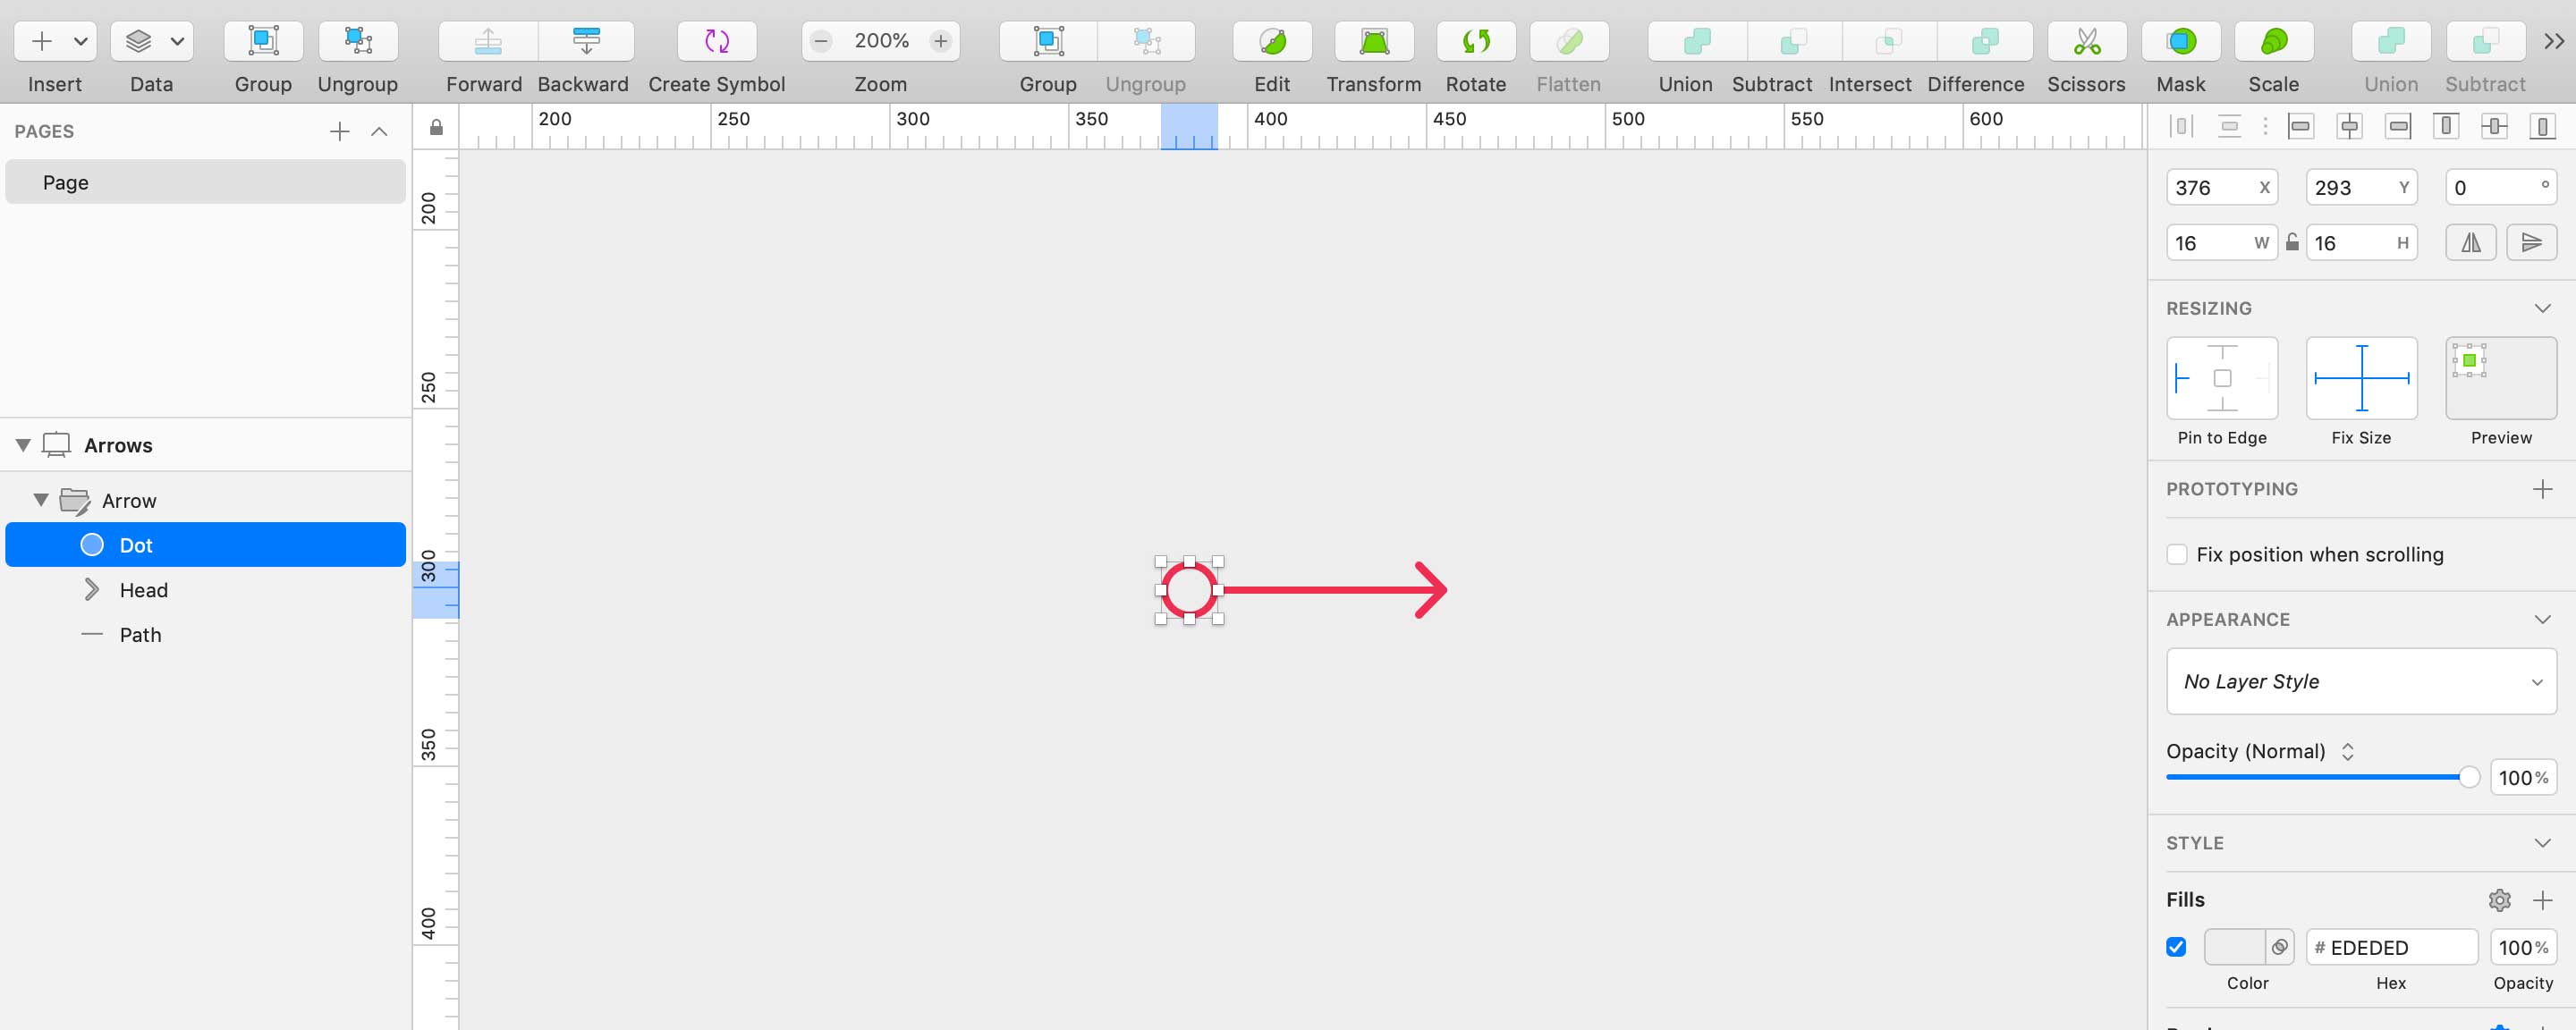 Resizable Arrows in Sketch